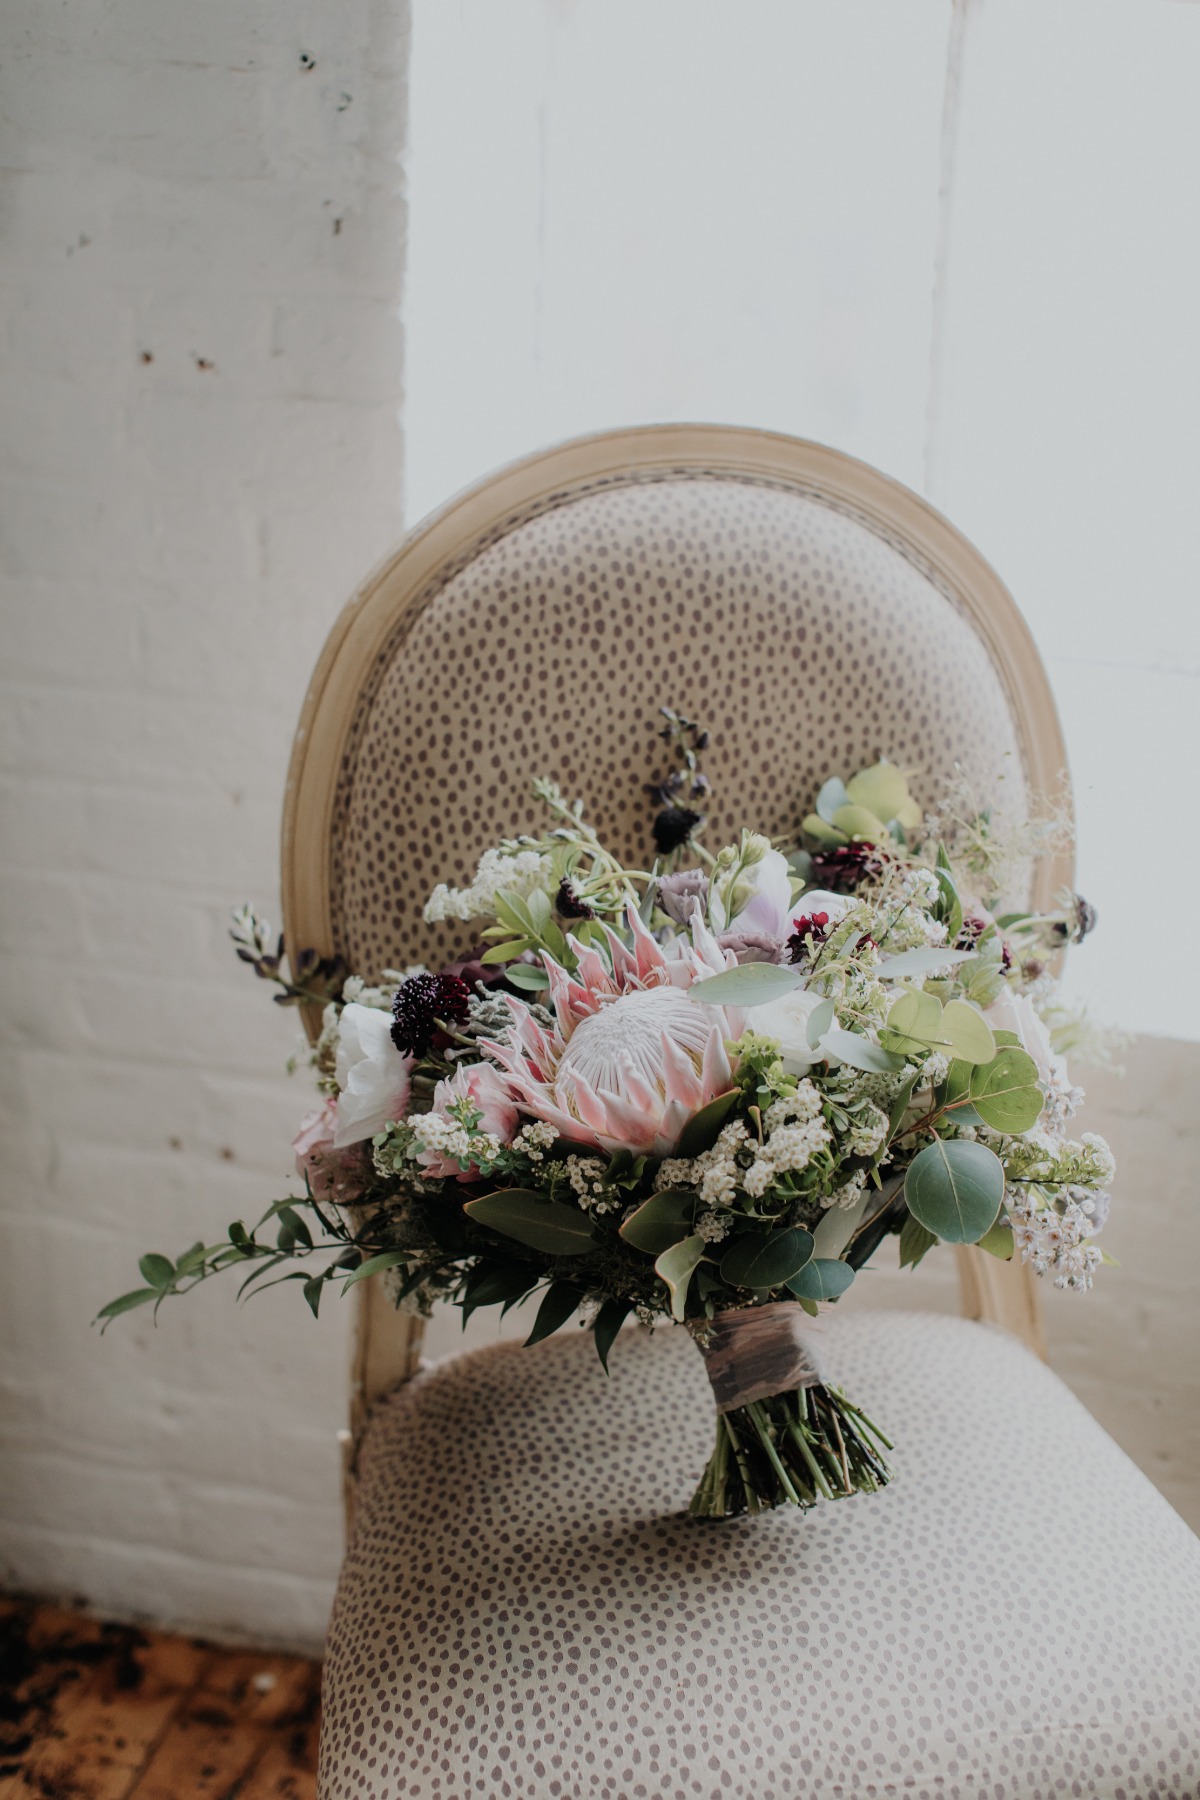 Protea and rose wedding bouquet designed by New Hampshire wedding florist, Apotheca Flowers.